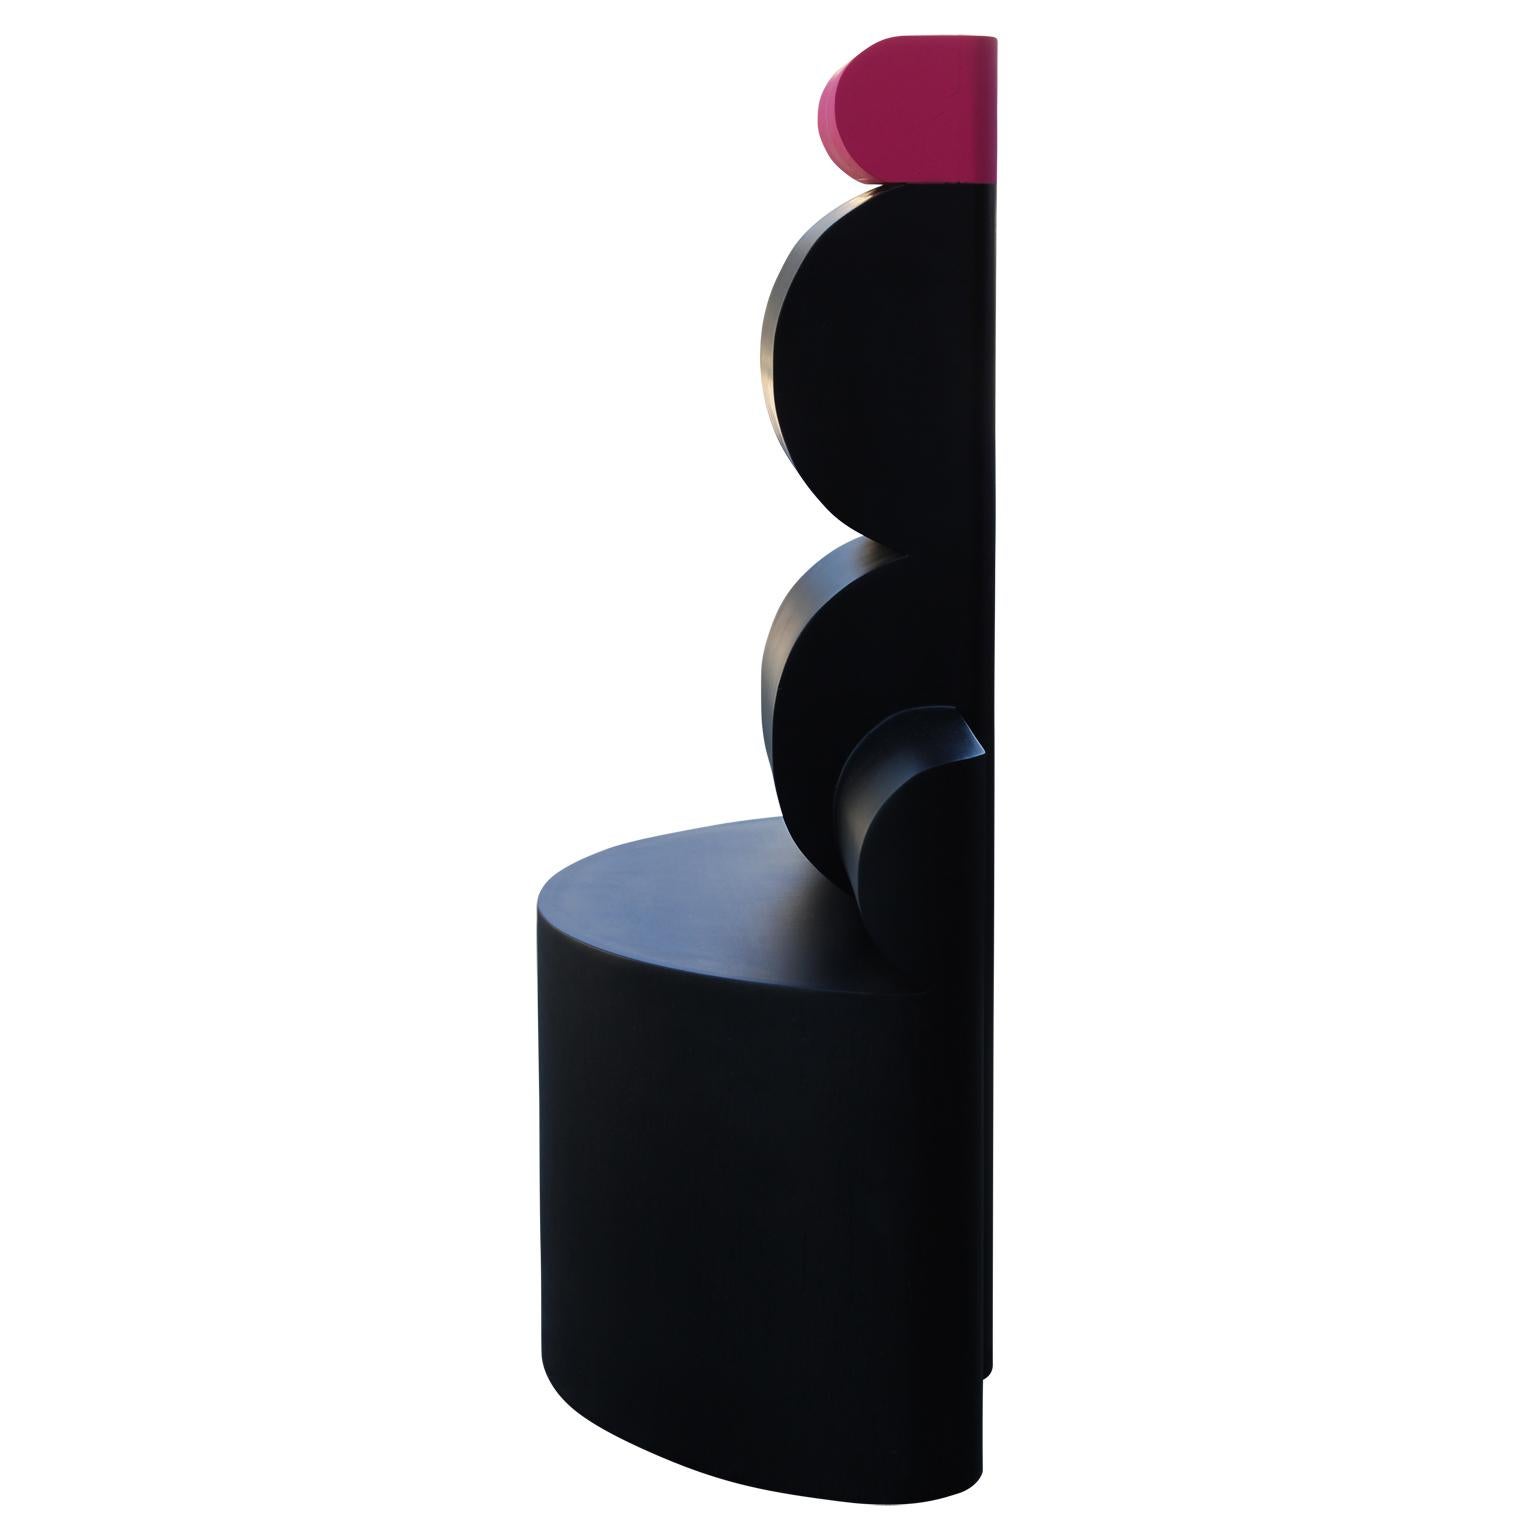 Minimalist black and neon pink organic sculpture by contemporary Houston, TX artist Matthew Reeves. Inspired by buoys commonly found along major waterways, the work features a column of black stacked half cylinders with a pink accent at the top. The